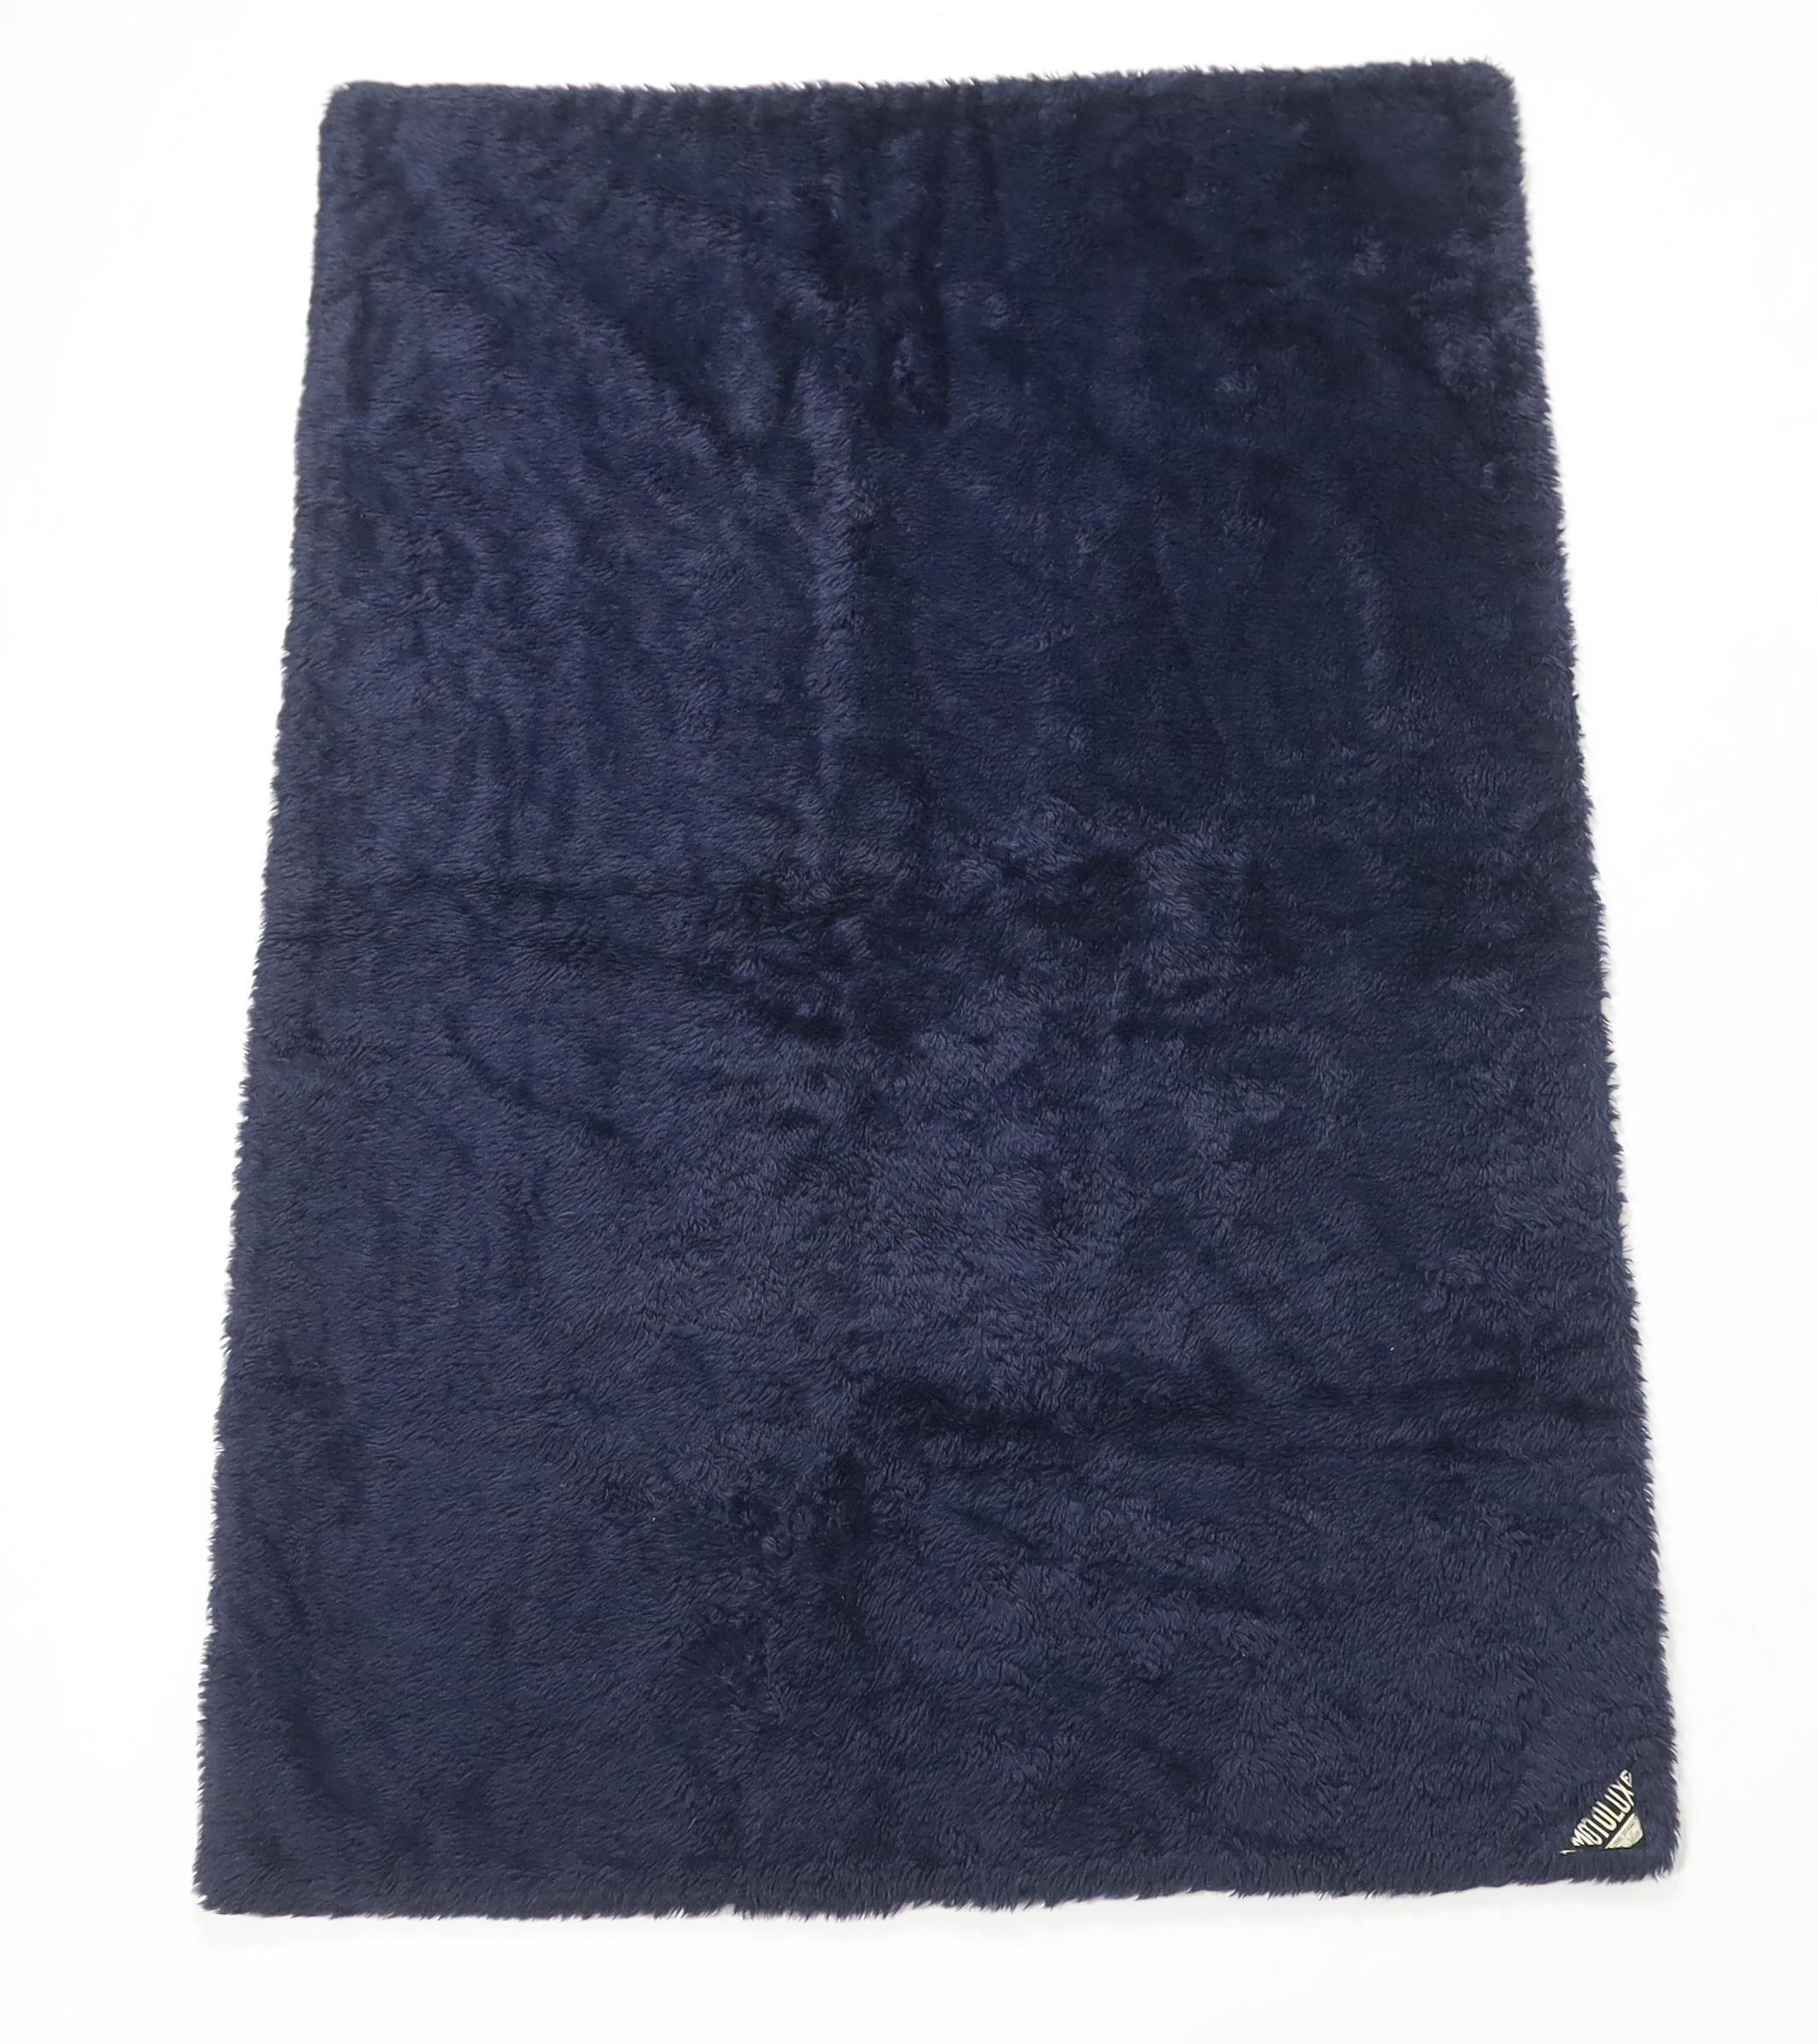 An unusual Motolux vintage car motoring rug, originally made in the 1930’s-40’s from Alpaca wool, reversible, one side navy and the other graduated grey, (the vendor remembers it keeping her warm in a Dicky seat as a chi